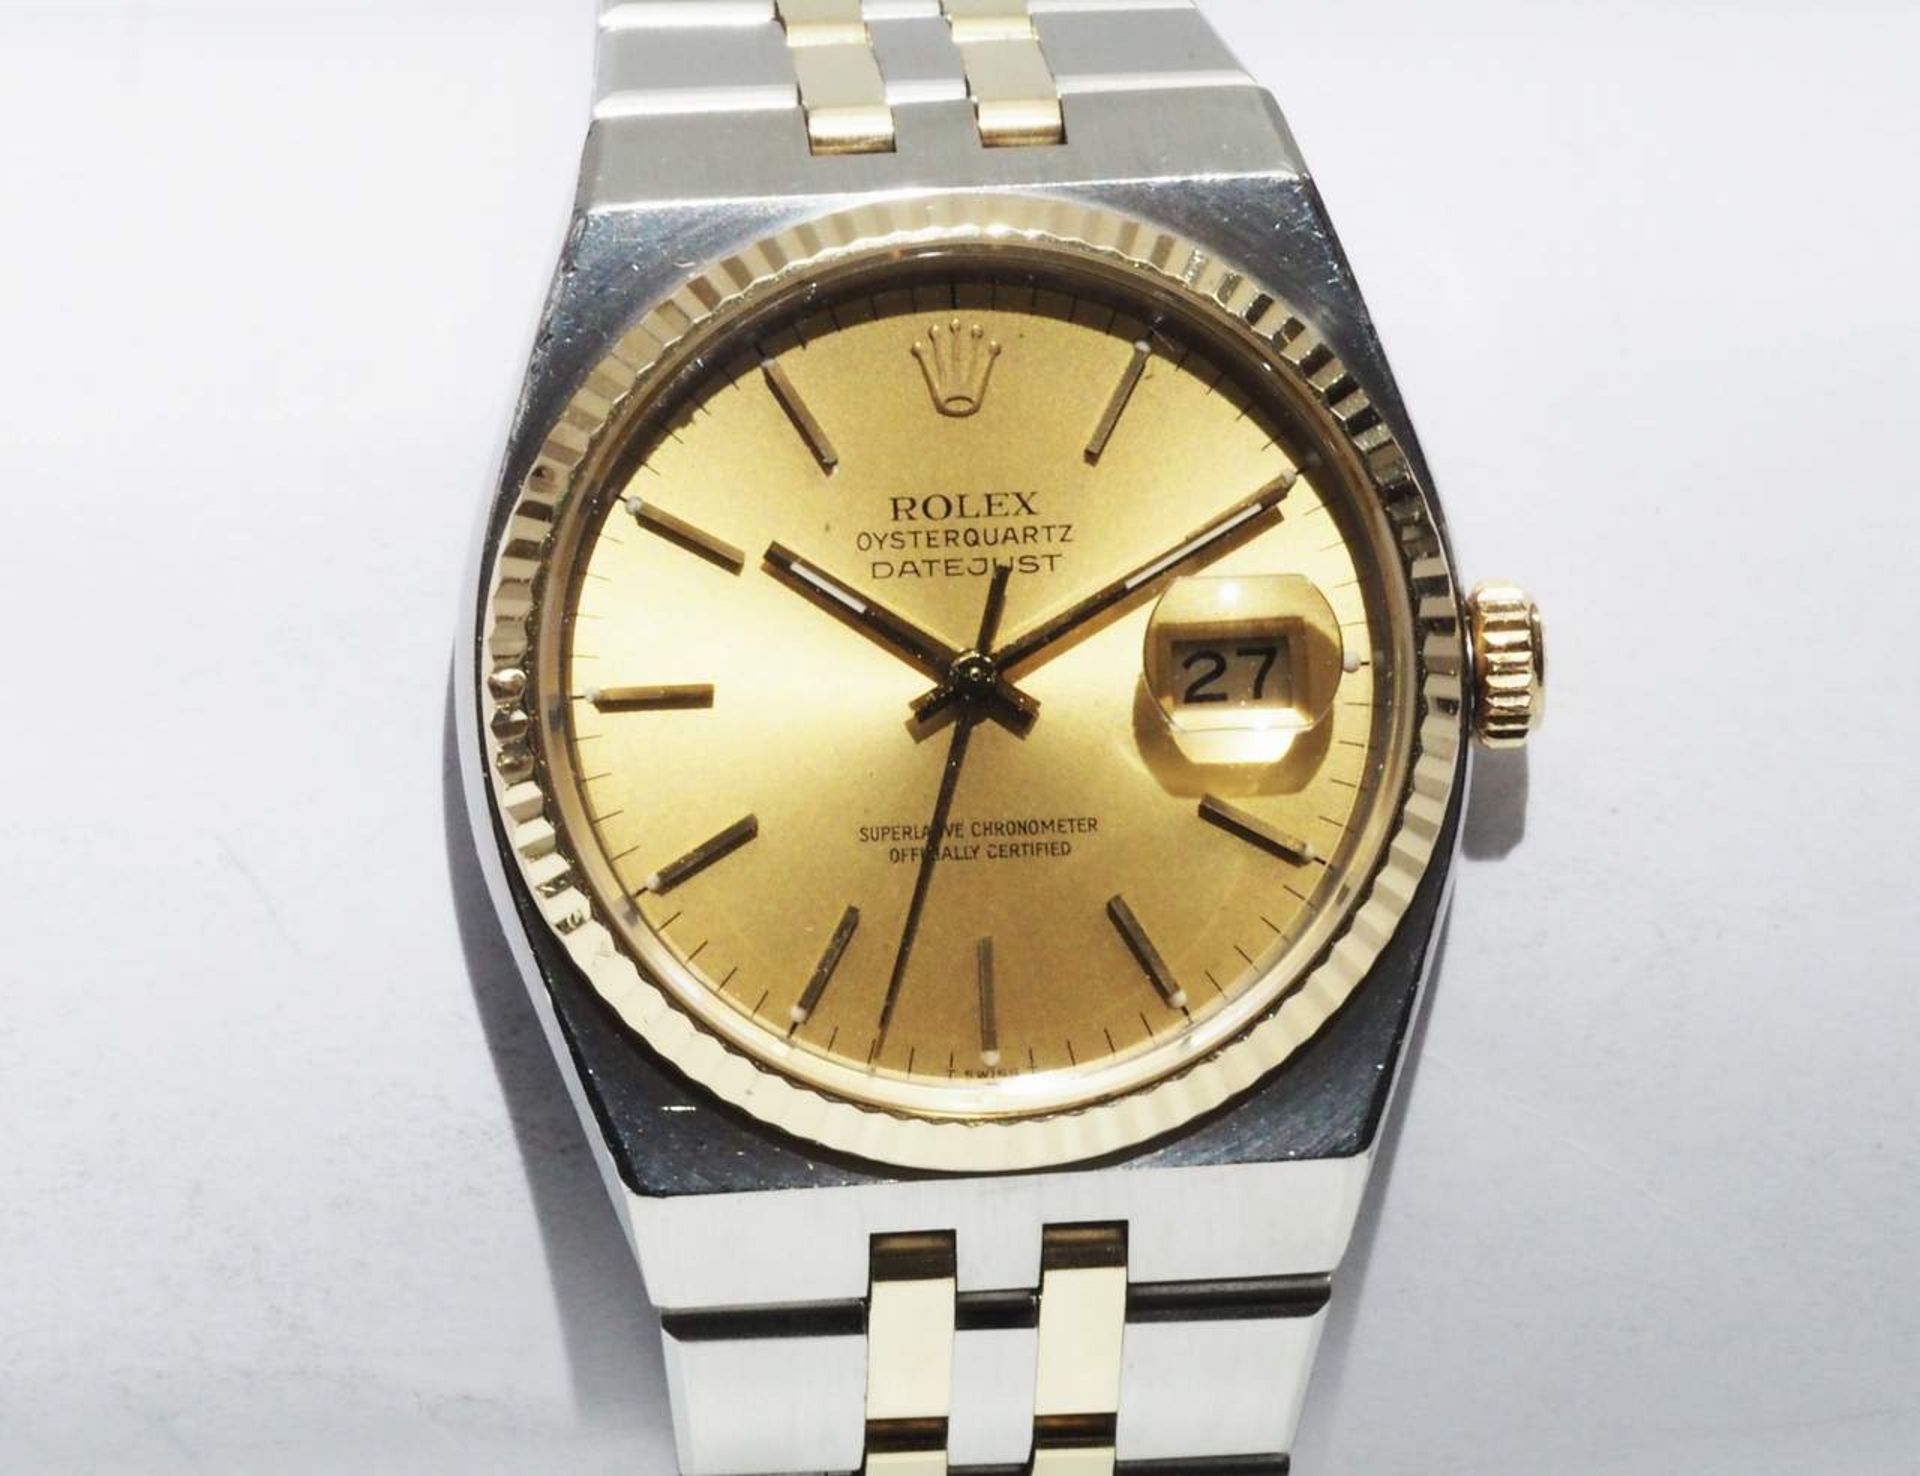 ROLEX Datejust Oysterquarz. - Image 3 of 12